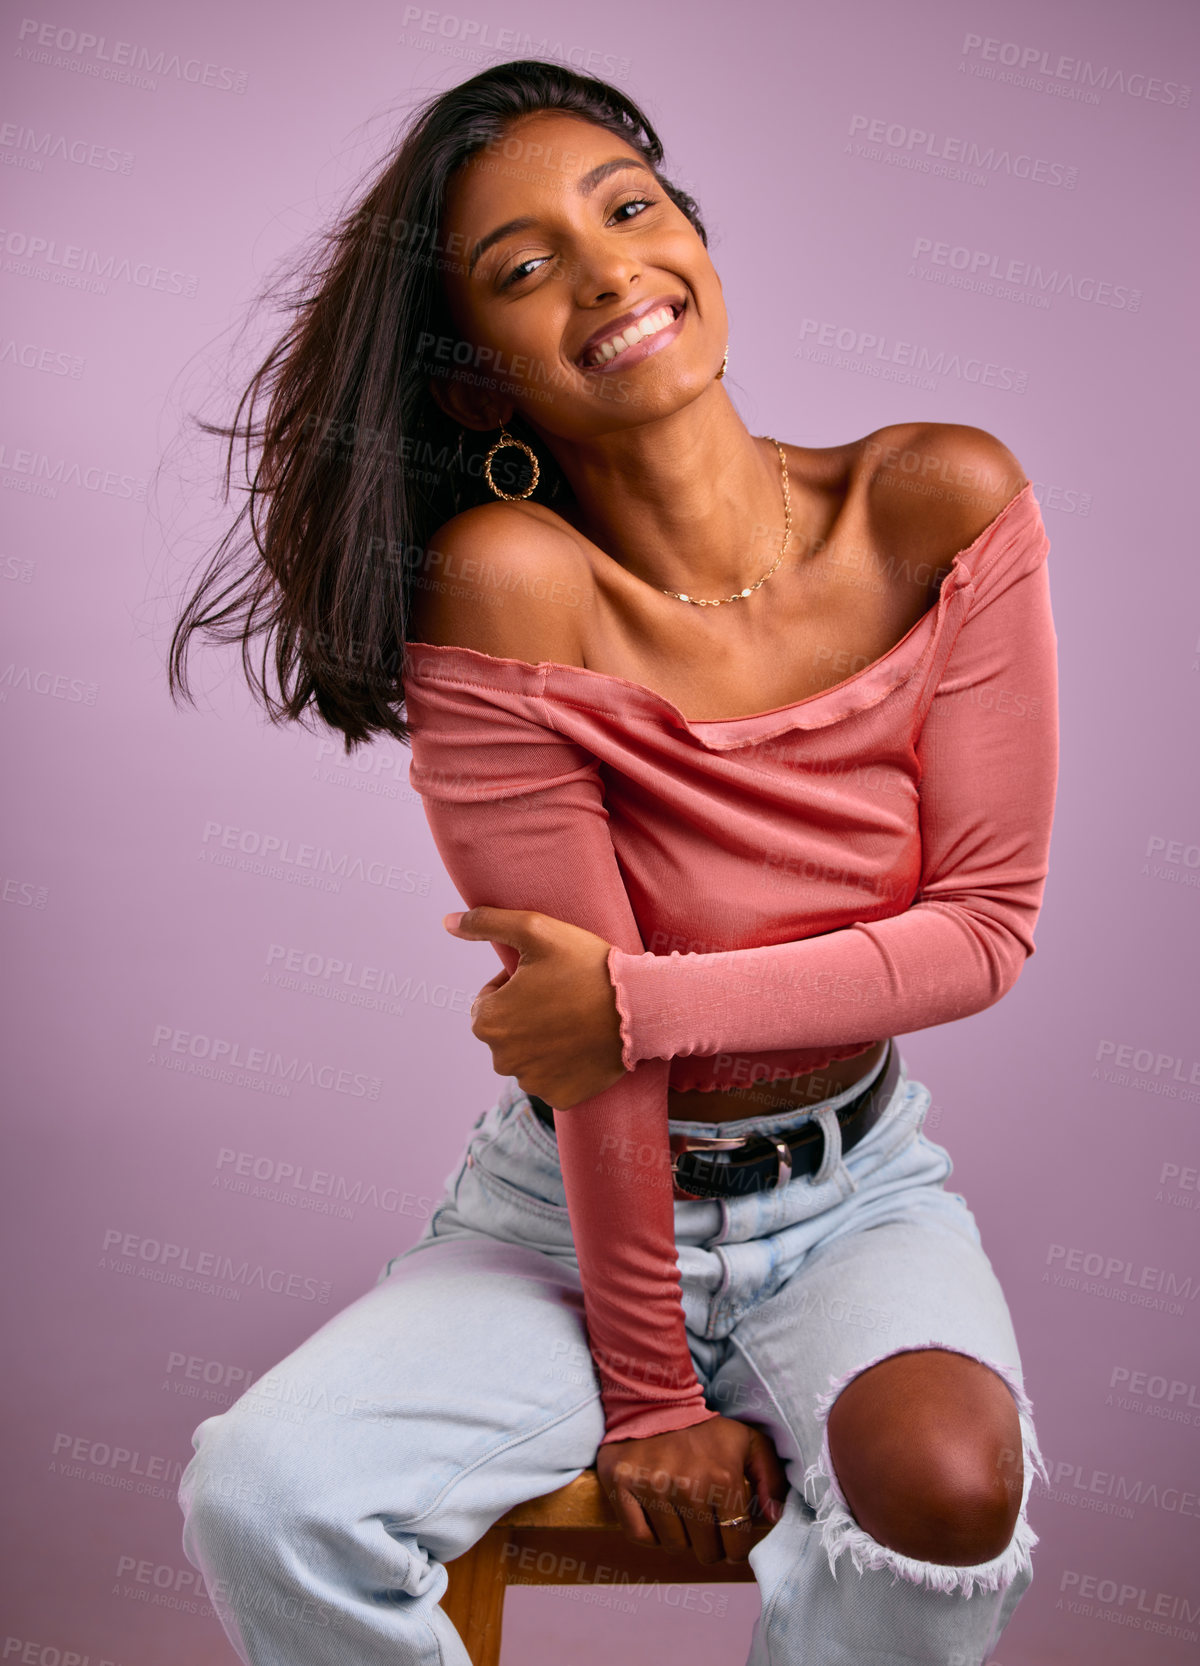 Buy stock photo Shot of a young woman smiling shot against a studio background